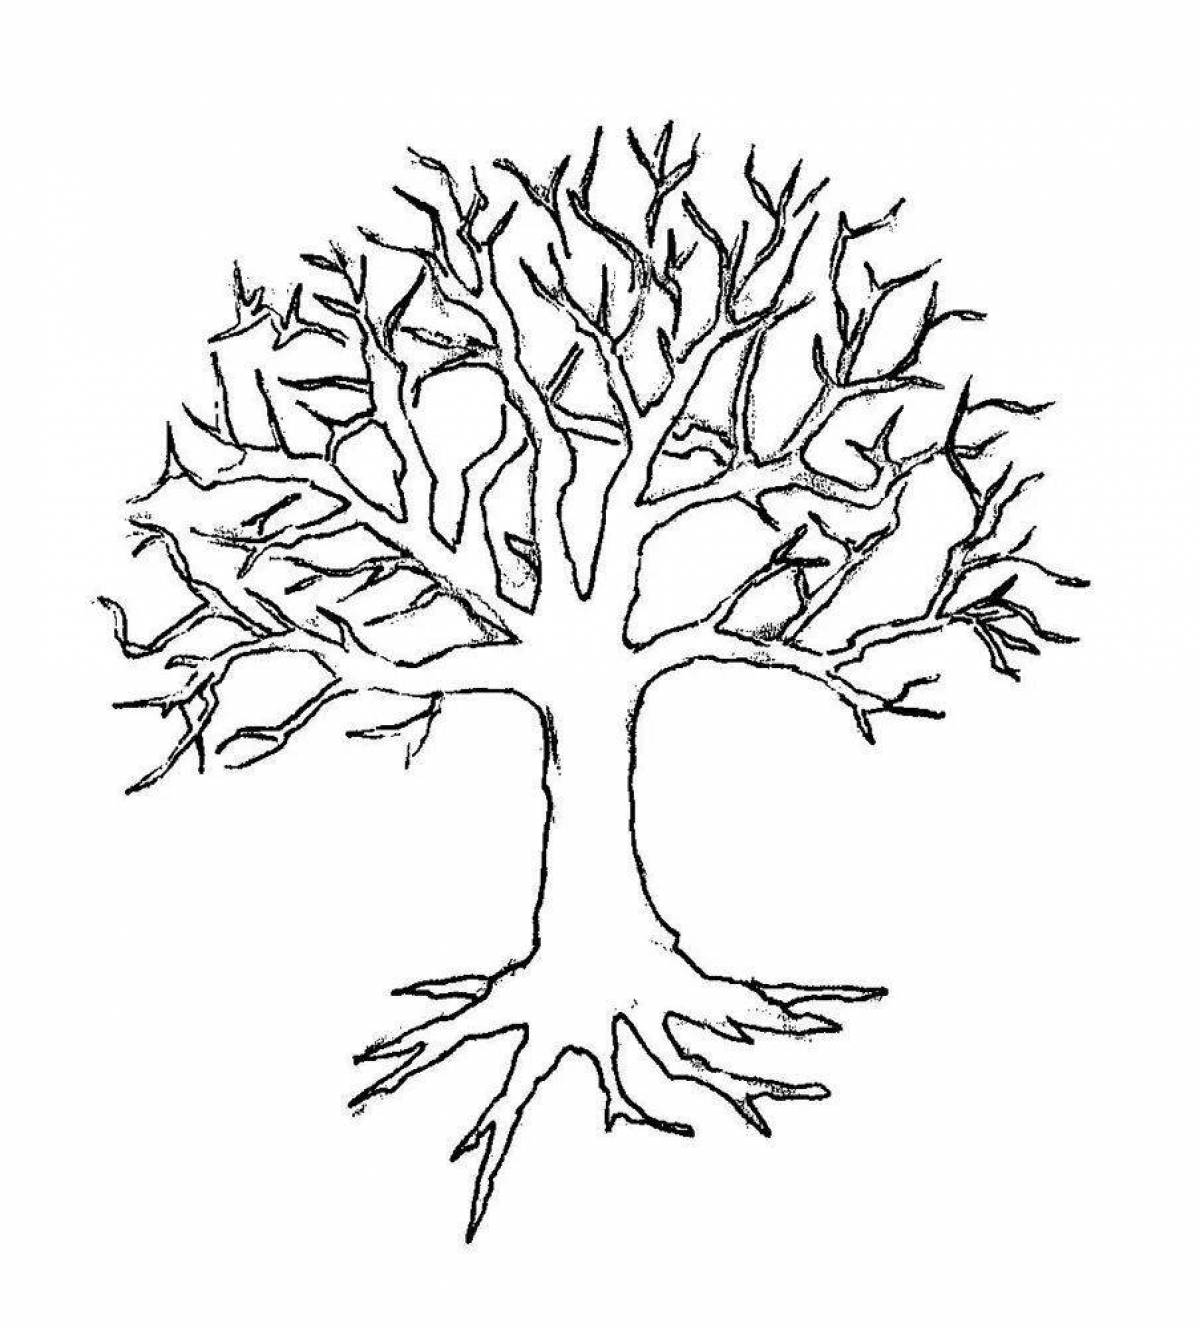 Coloring page of a fascinating tree pattern